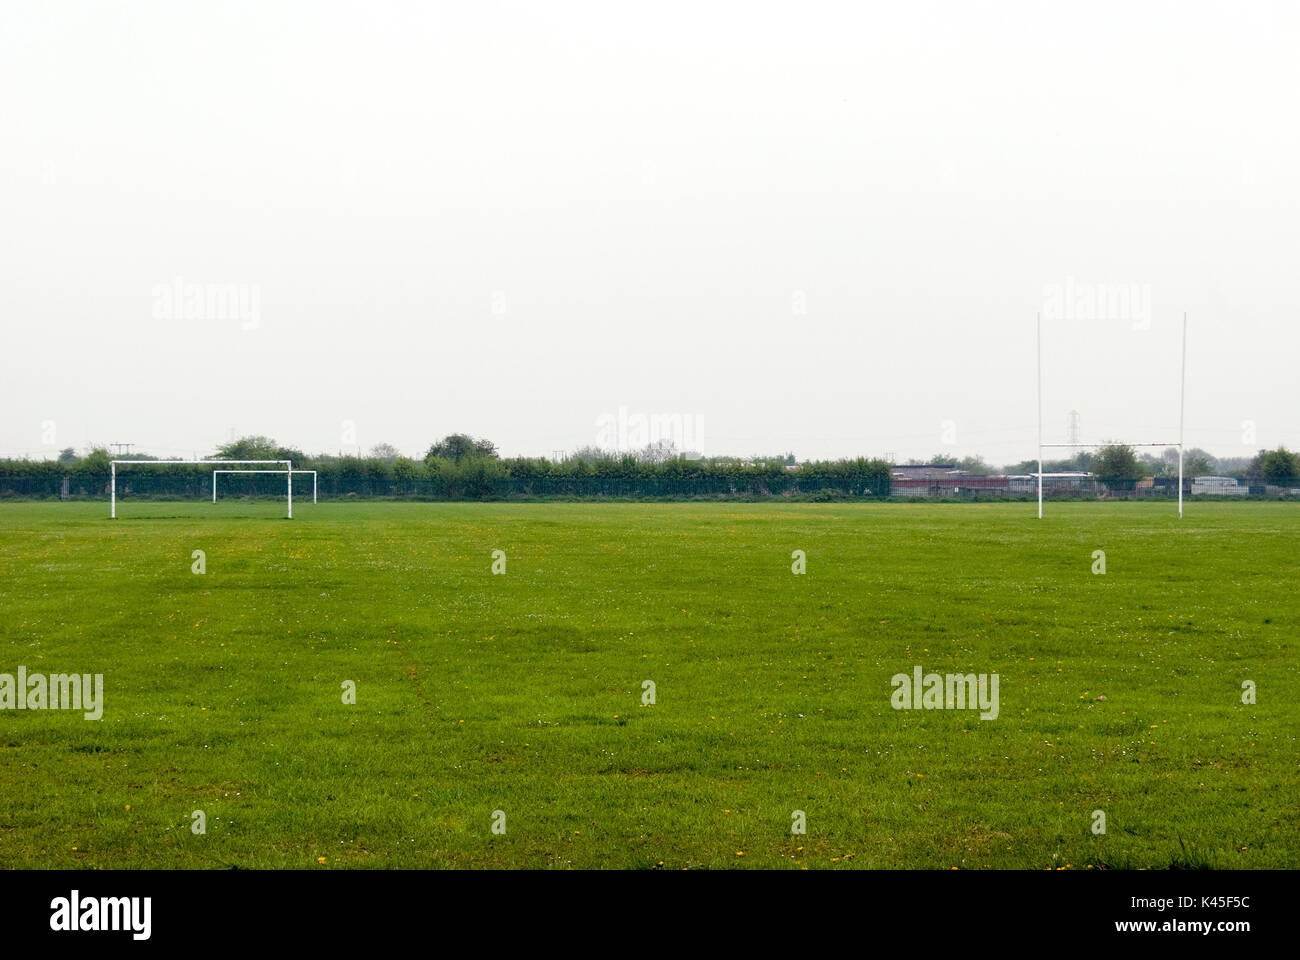 Empty/Abandoned Football/Rugby Field Background, Football and Rugby Posts on a Field on an Overcast Day Setting, Overcast Scenery, Sports Field Stock Photo